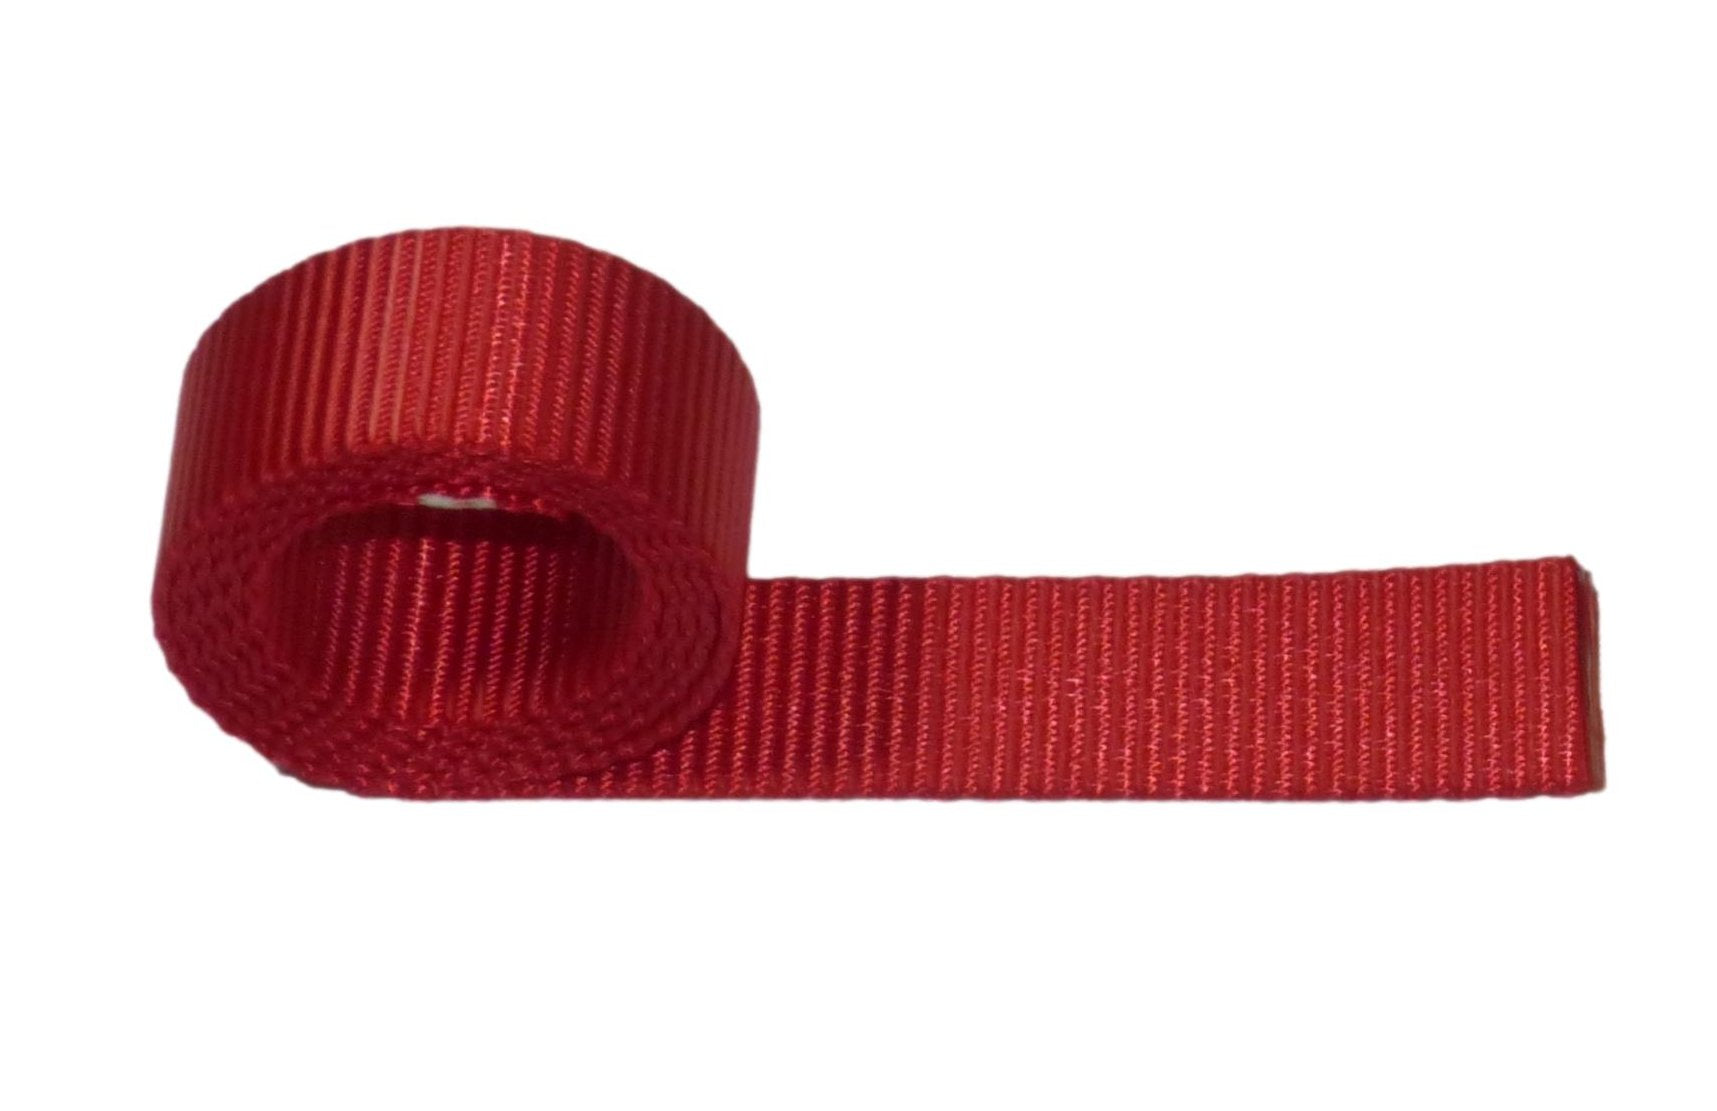 Benristraps 25mm Polyester Webbing in red